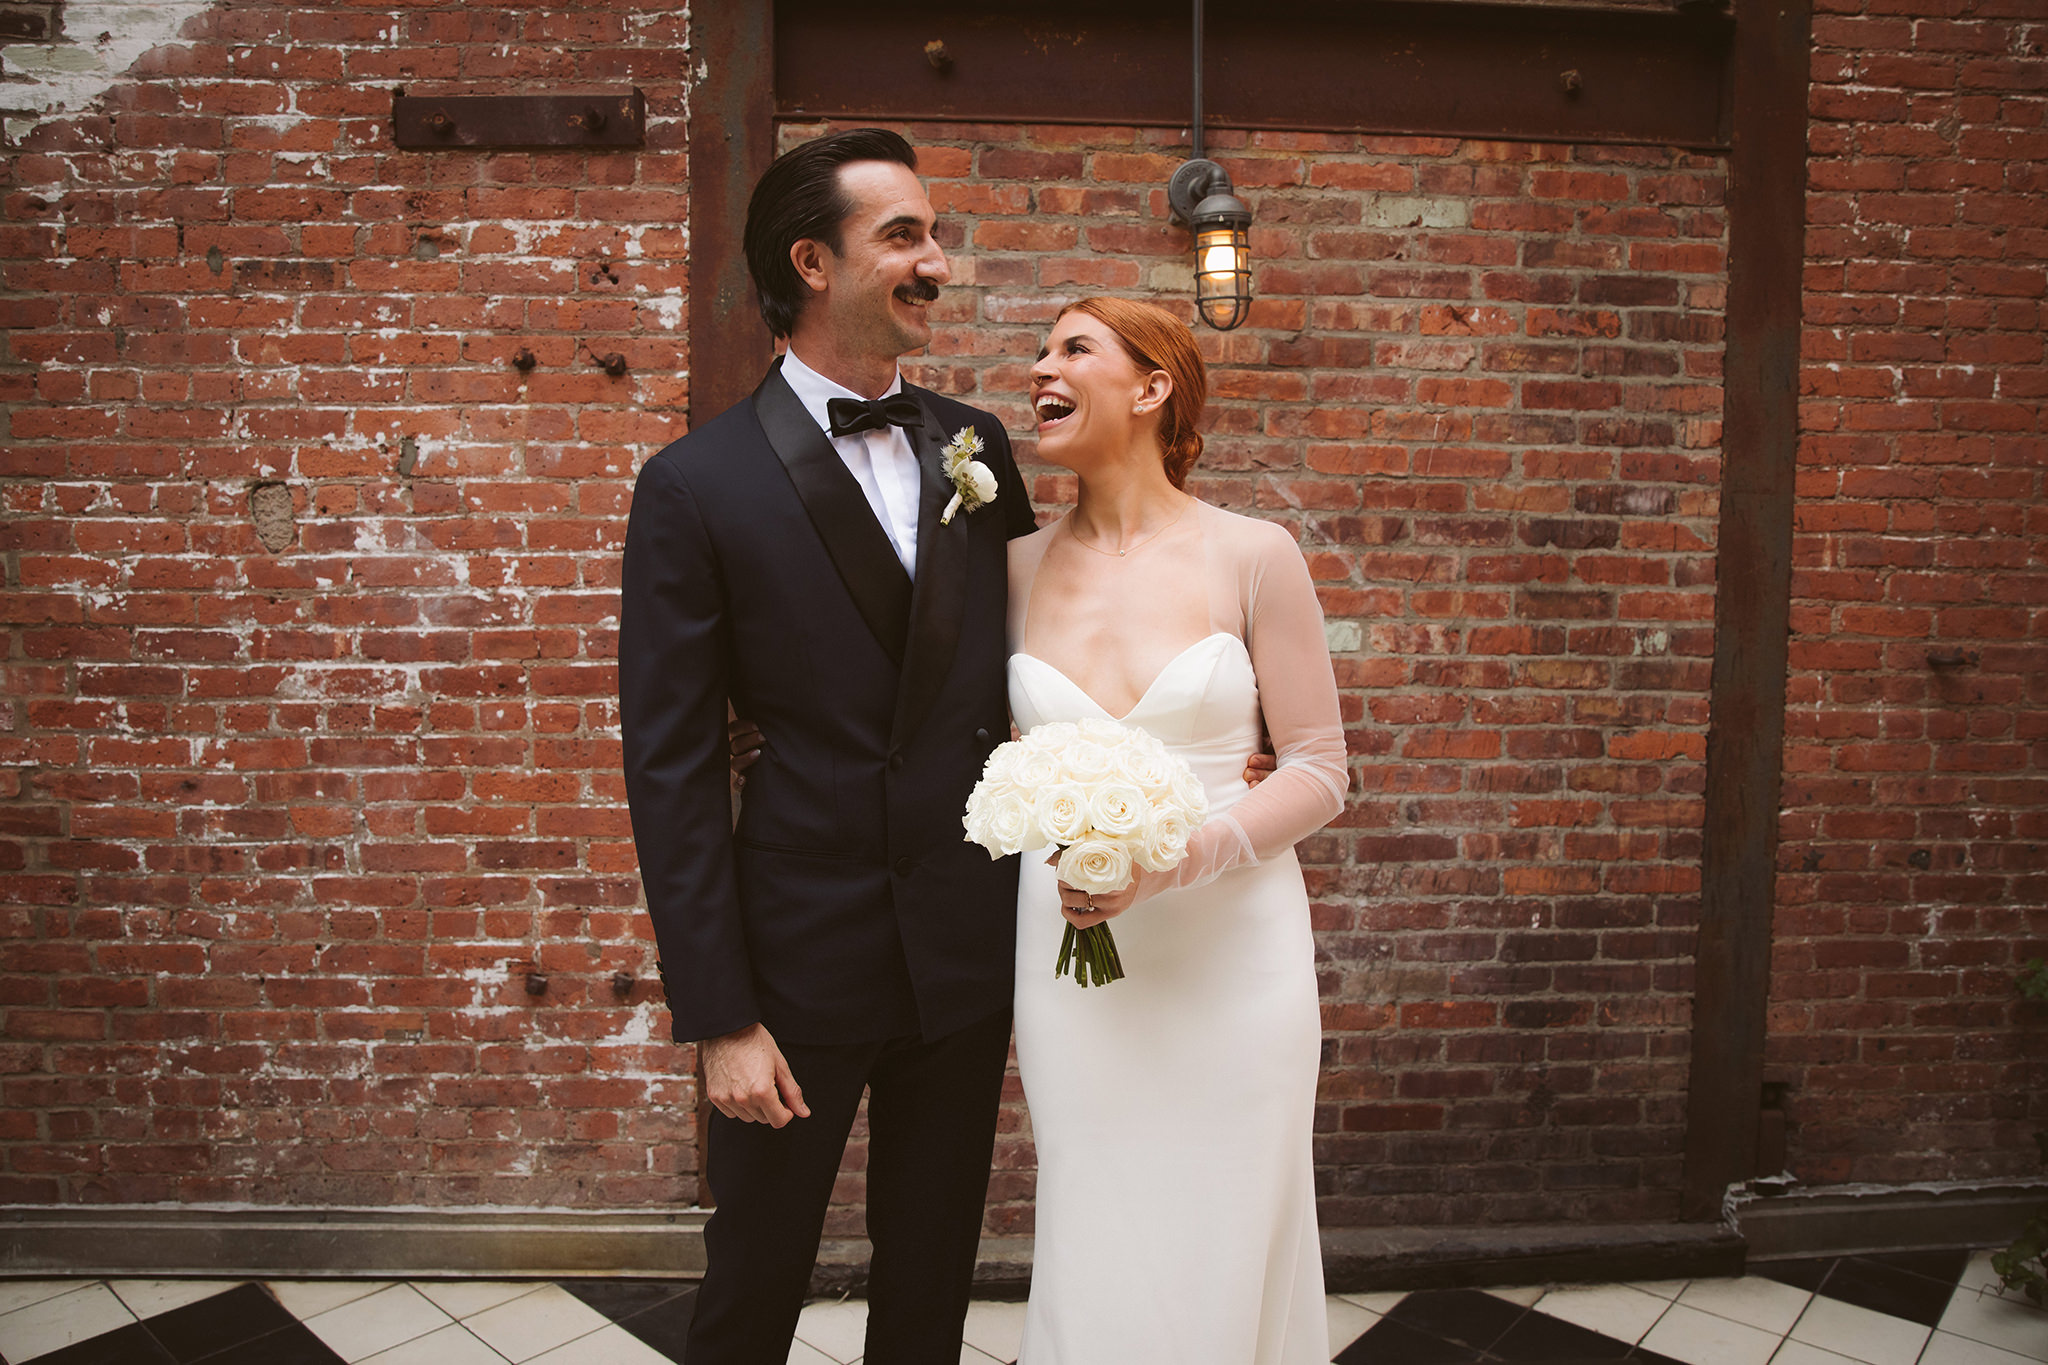 An industrial wedding portrait in front of a brick wall at the Wythe Hotel